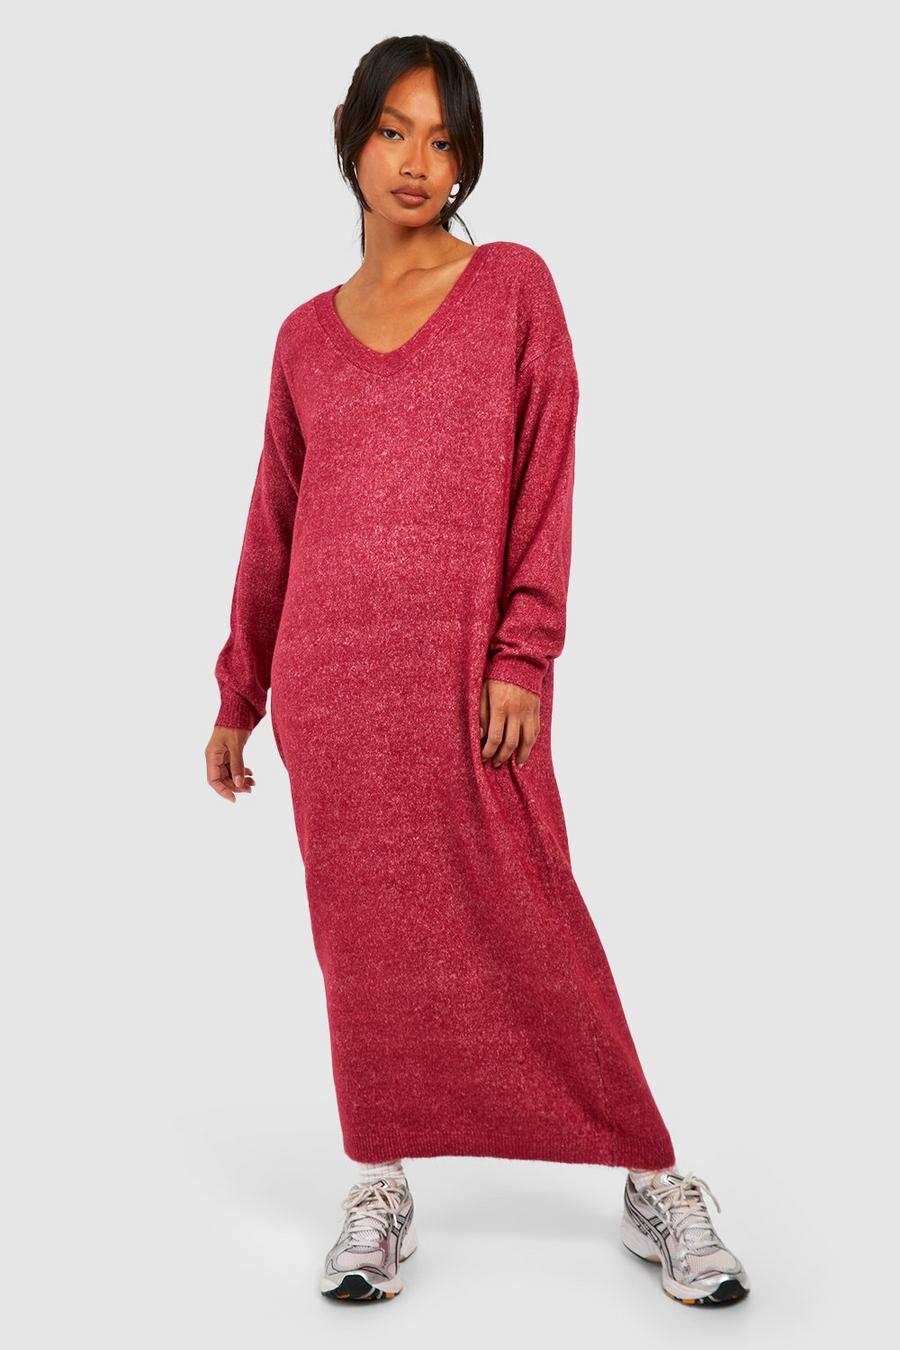 Raspberry pink Slouchy Soft Knit Maxi Knitted Dress